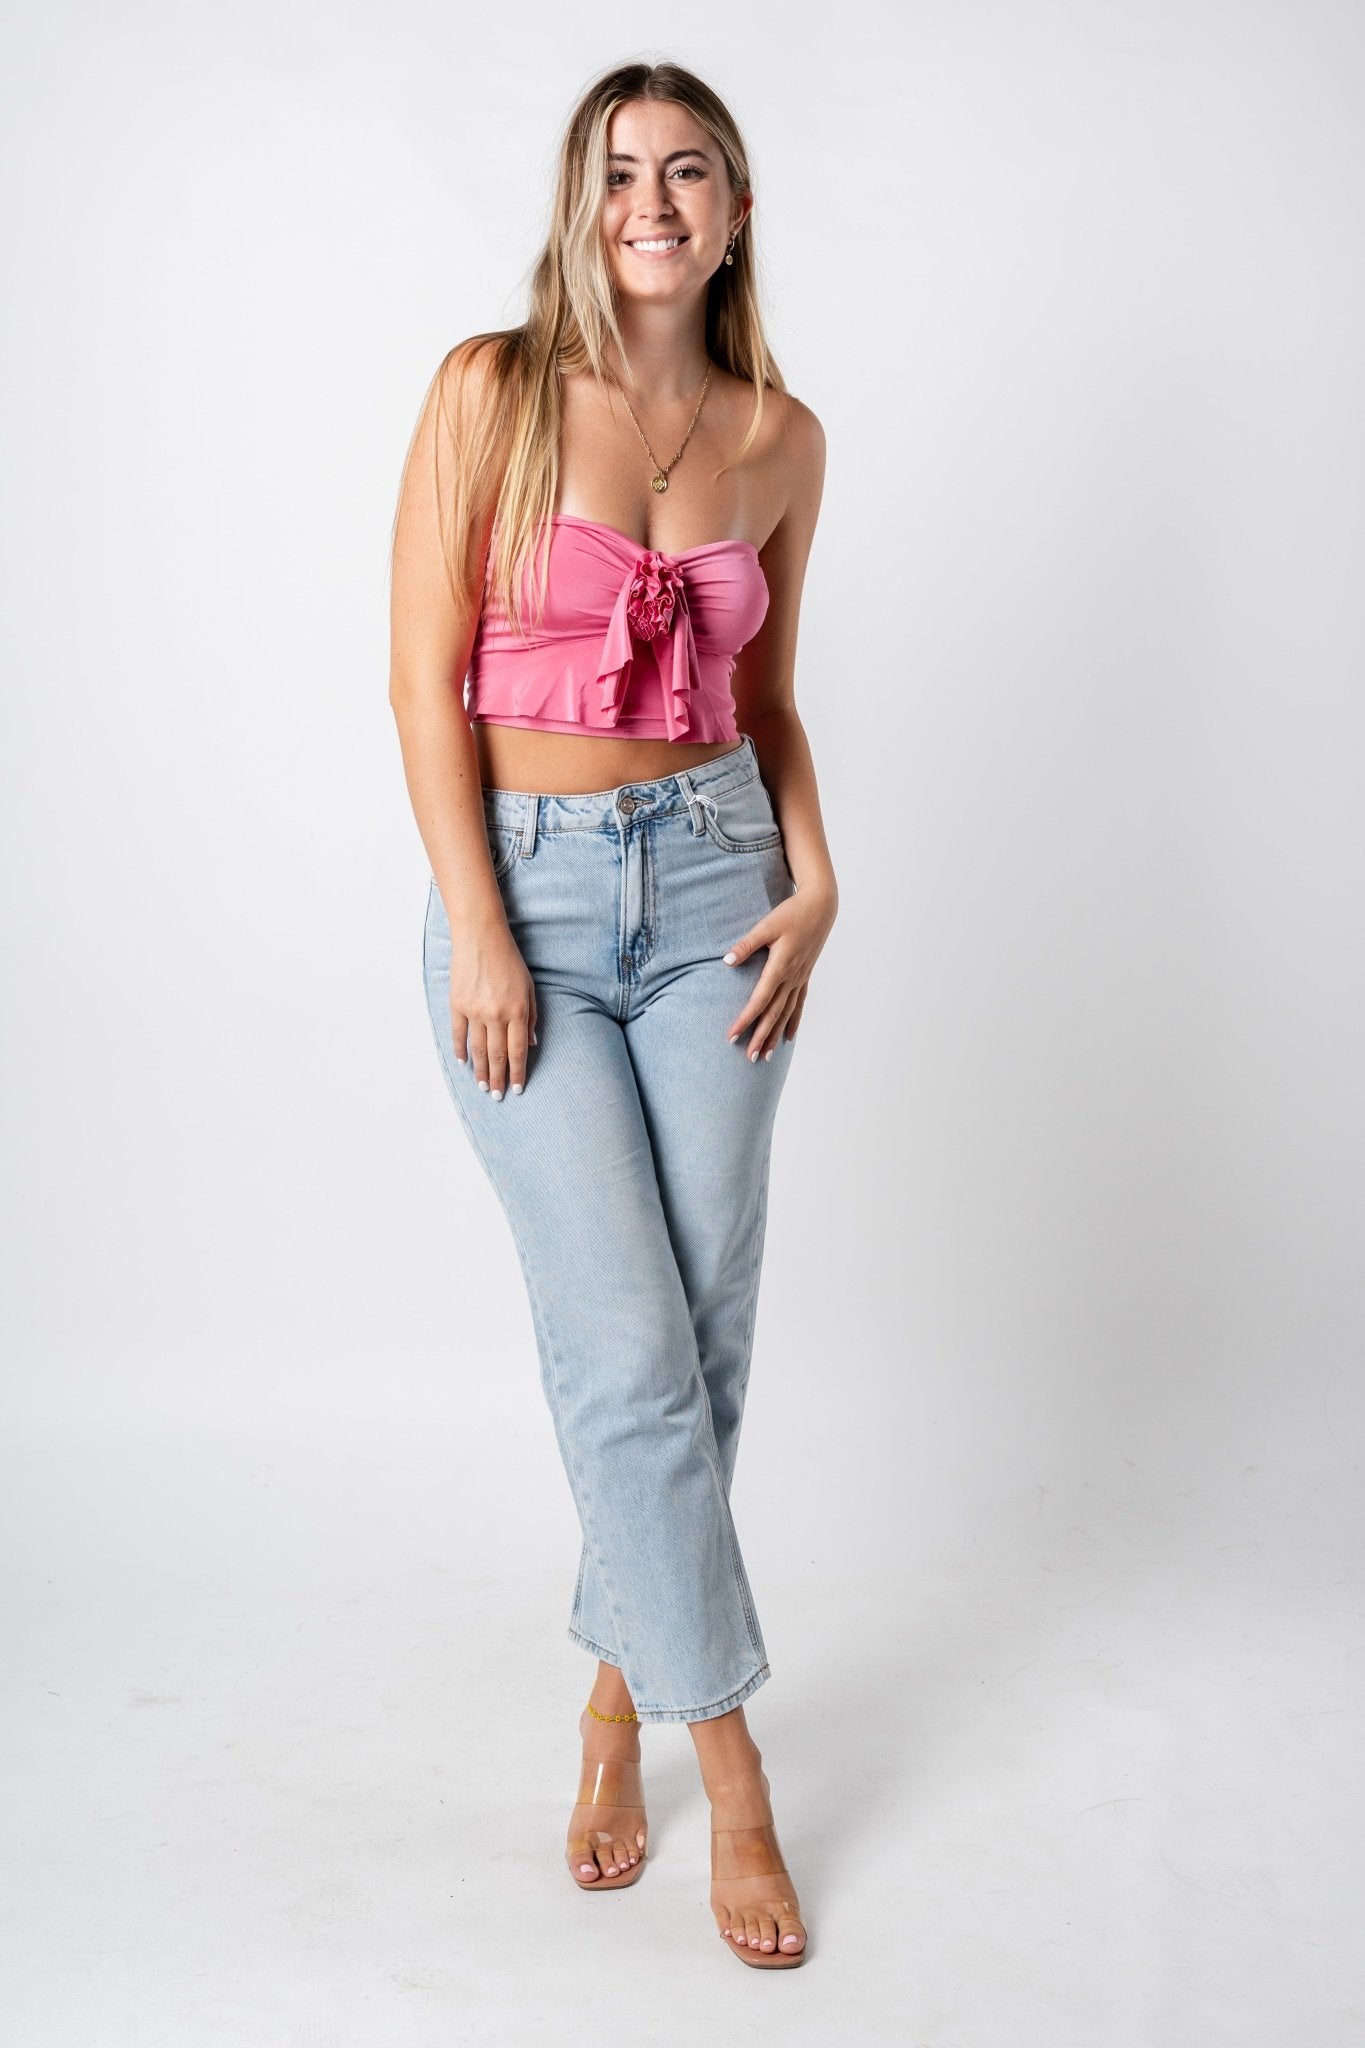 Rosette ruffle tube top candy pink - Cute Valentine's Day Outfits at Lush Fashion Lounge Boutique in Oklahoma City